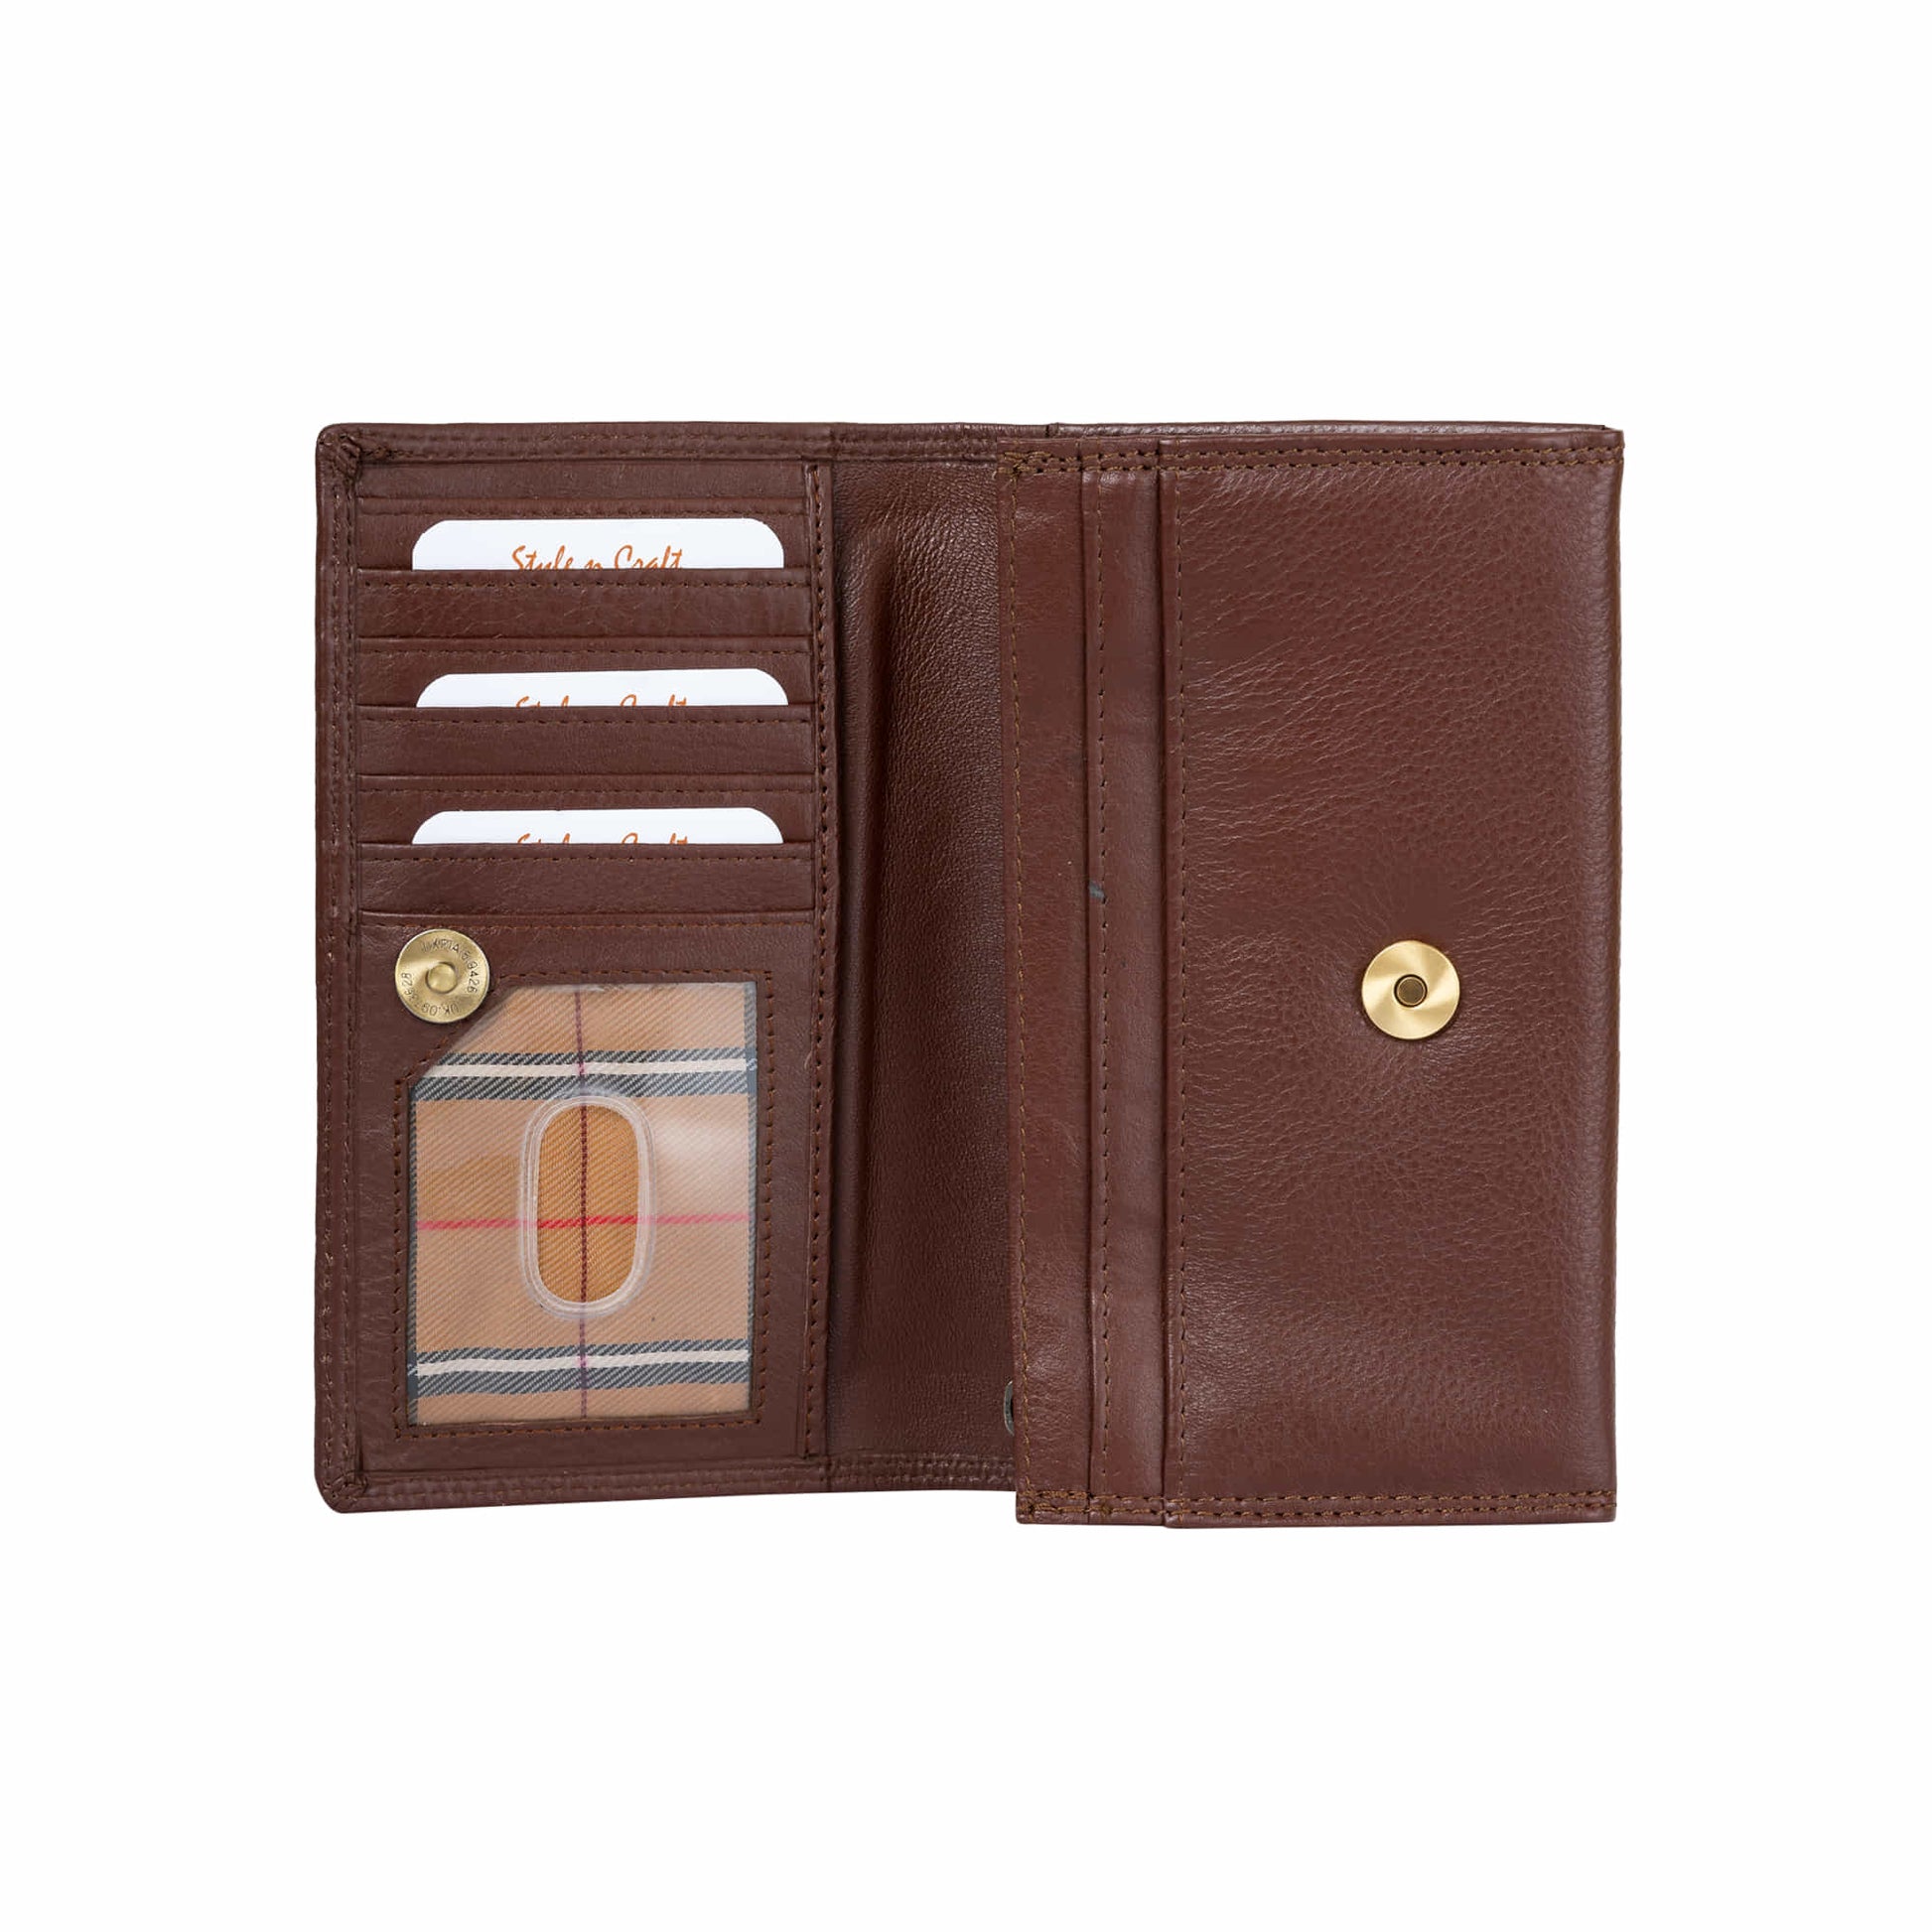 Style n Craft 391102 Ladies Clutch Wallet in Brown Full Grain Leather - Open View 1a - Showing the ID Window, Credit Card Pockets & the Magnetic Button for Closing